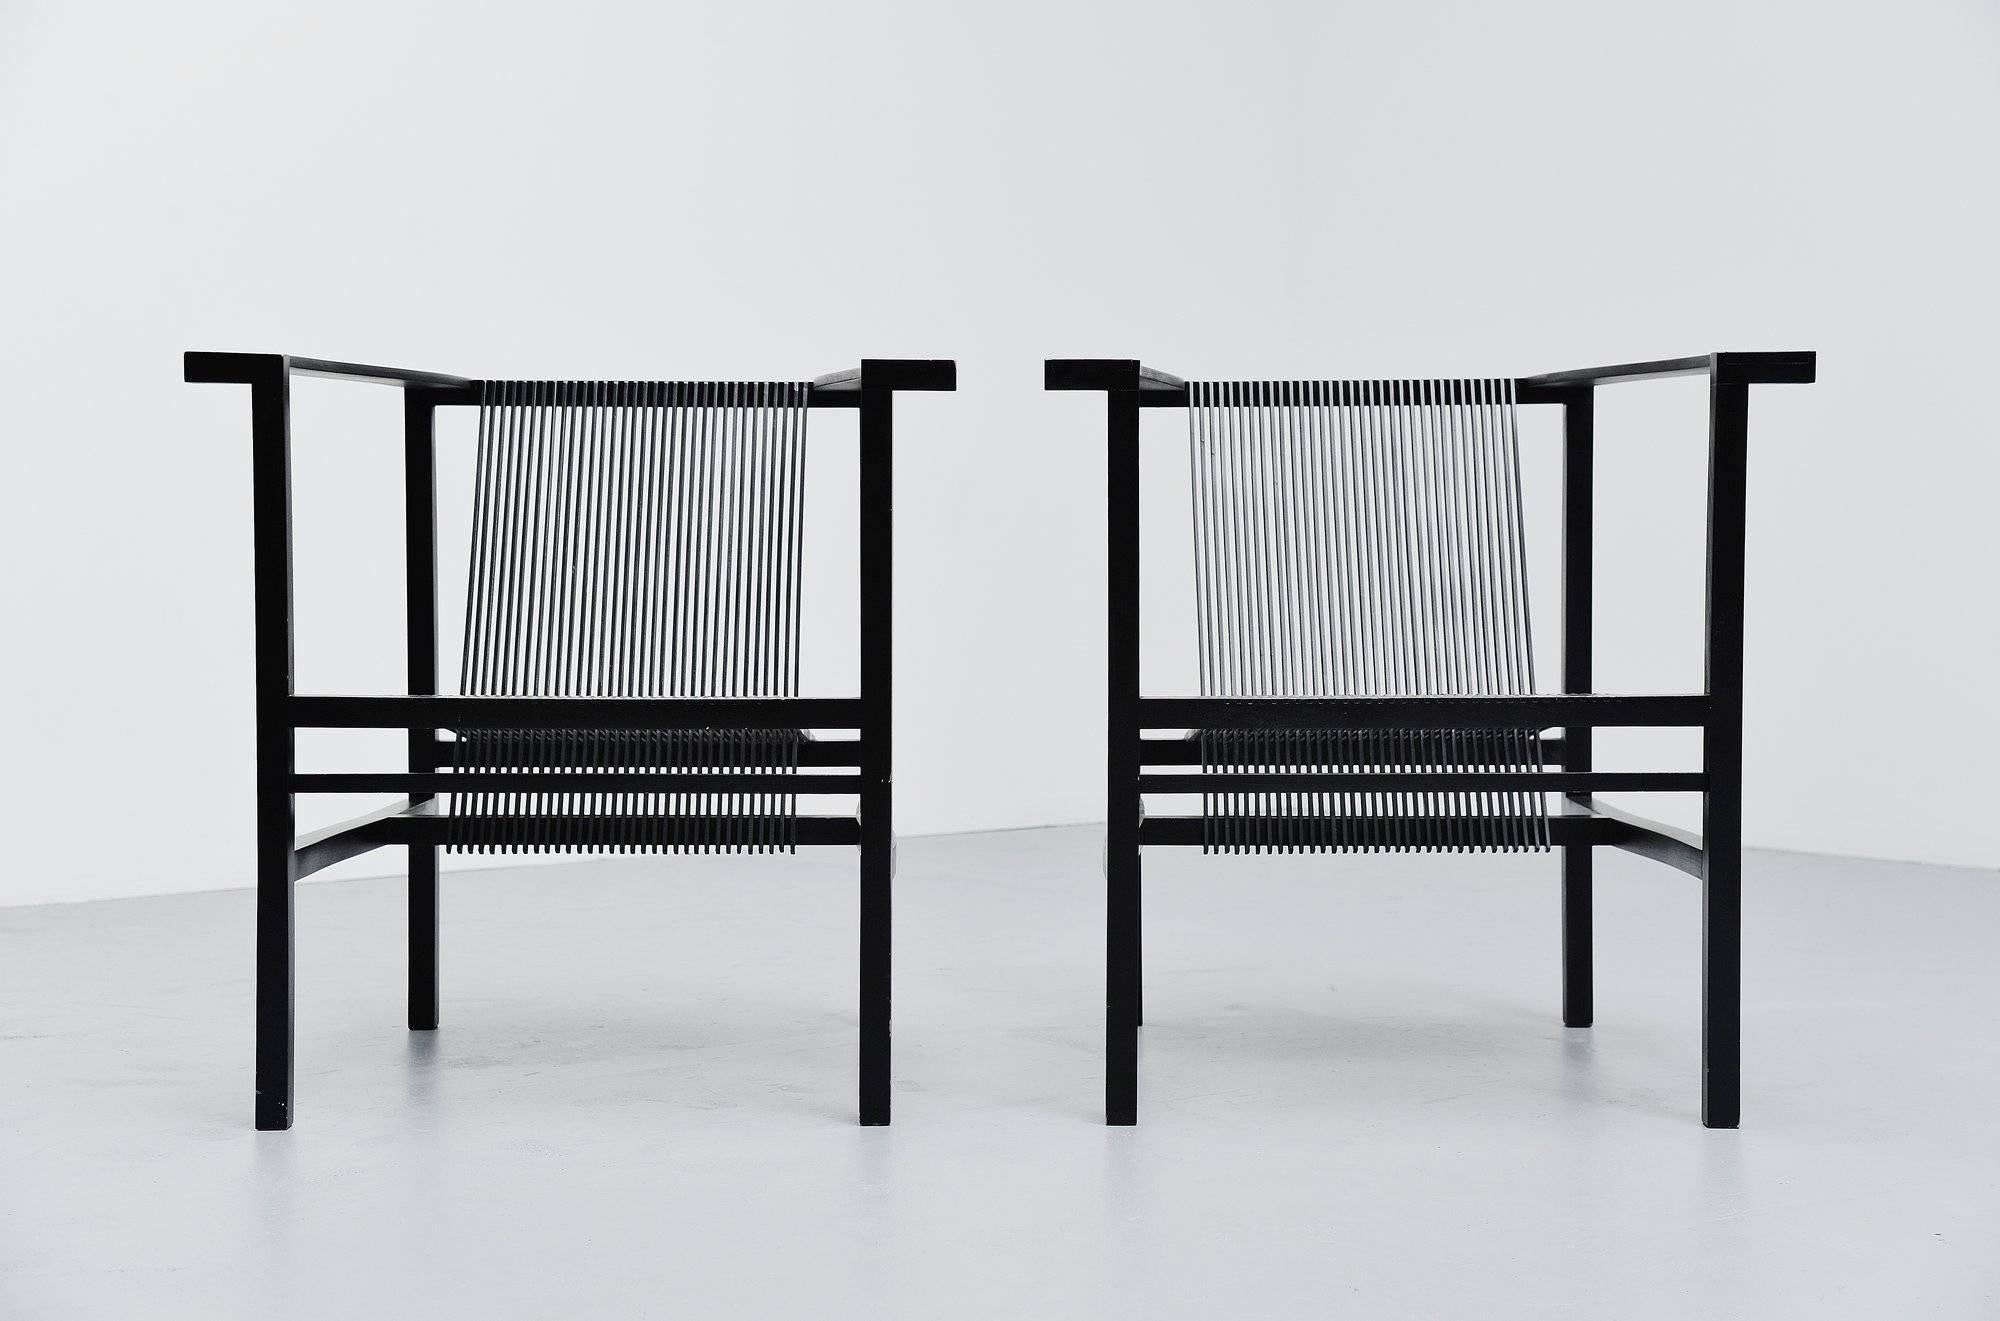 Pair of rare high slat armchairs designed by Ruud Jan Kokke, produced by Metaform 1984. These chairs were produced by Metaform for 17 years, and only on request because the production was too costly. This is for a very nice pair of black lacquered